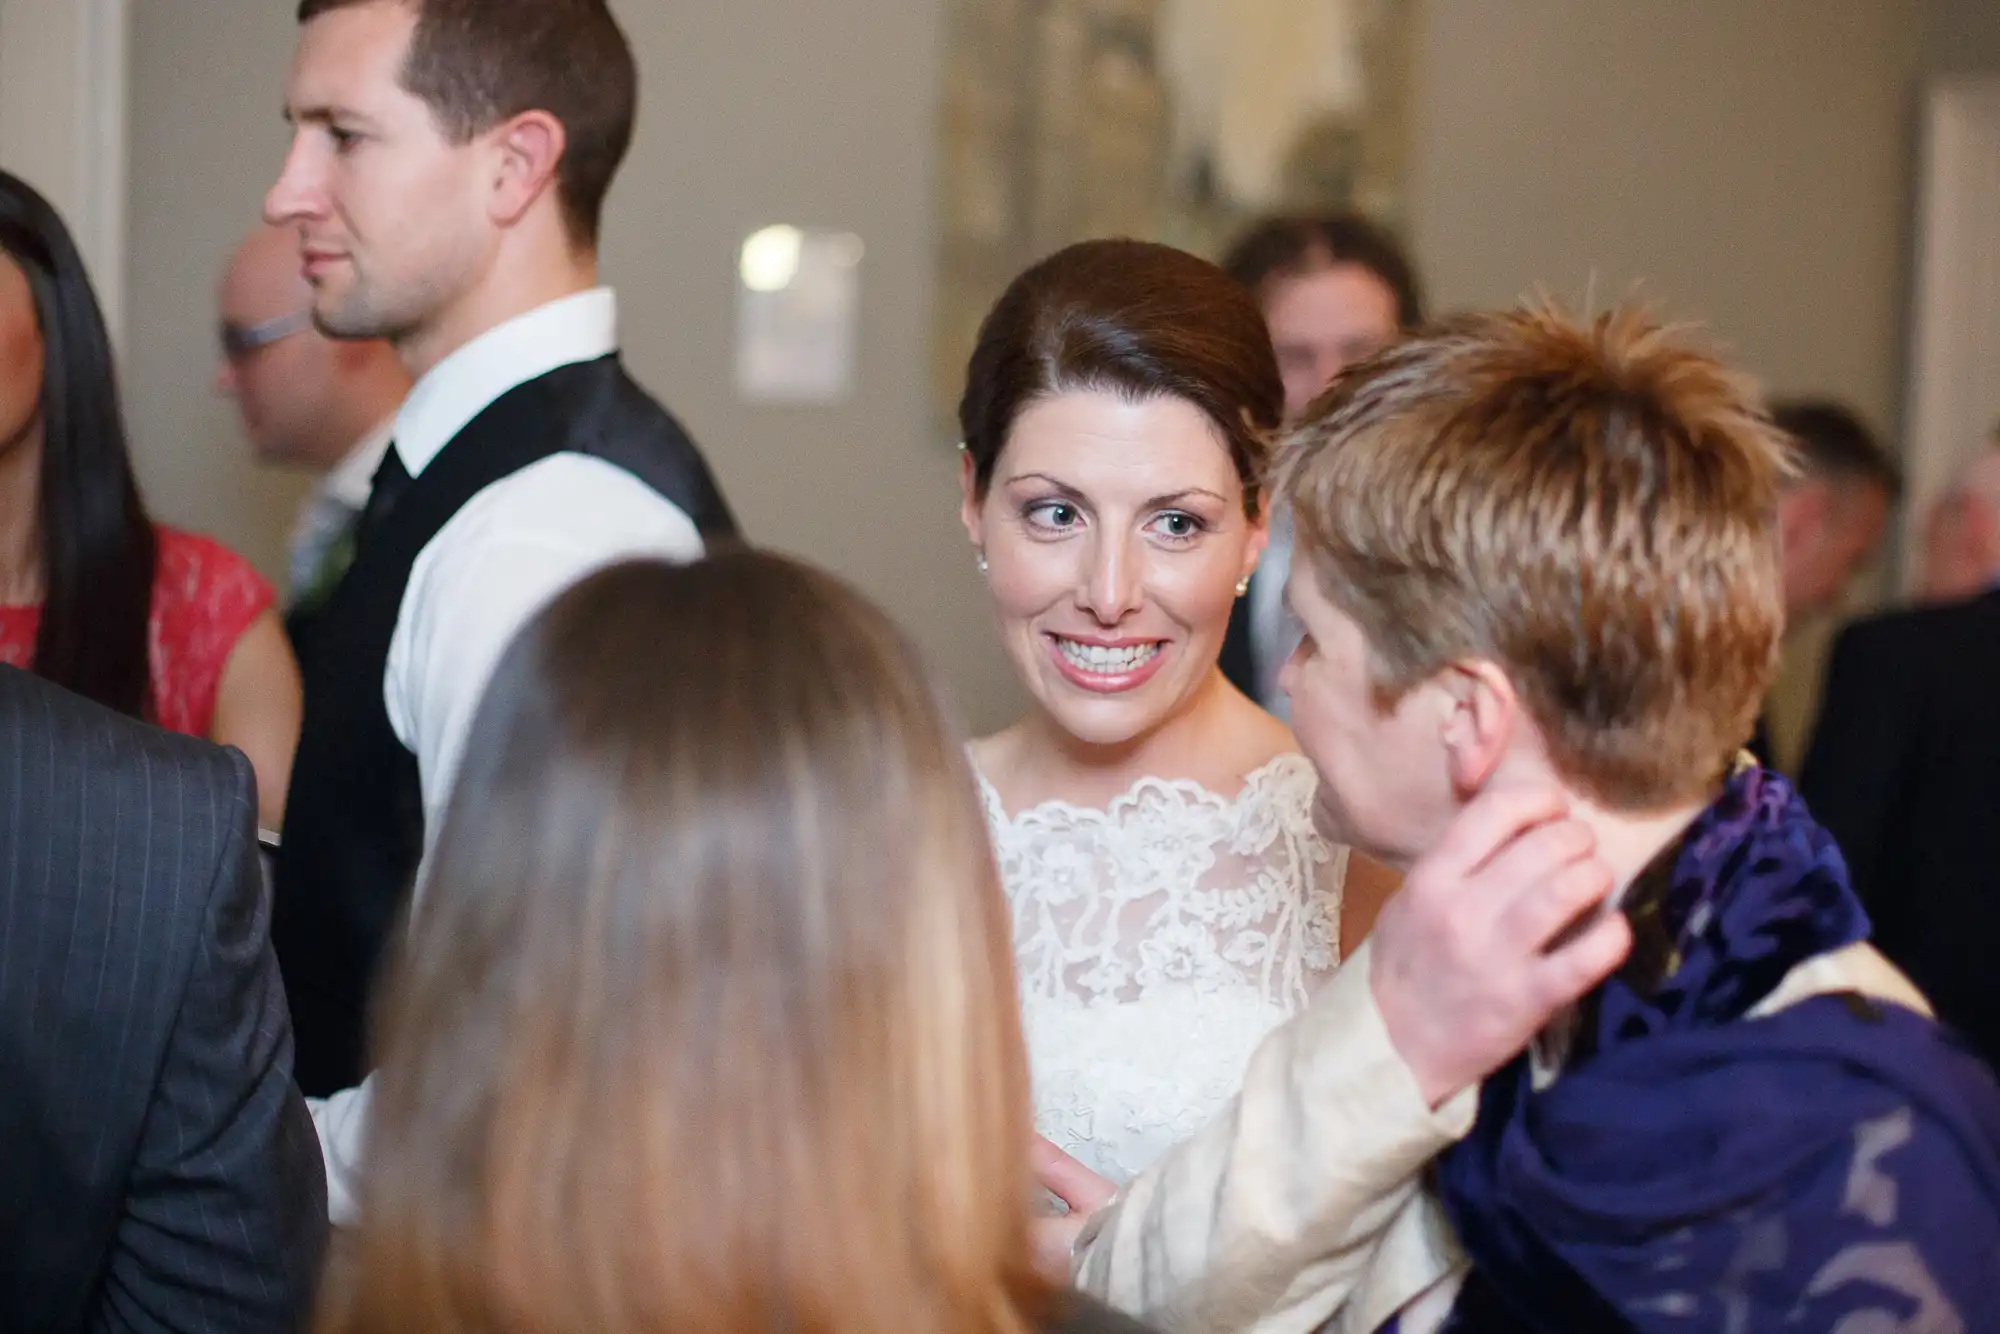 A smiling bride in a lace dress converses with guests at a wedding reception, with other attendees visible around her.